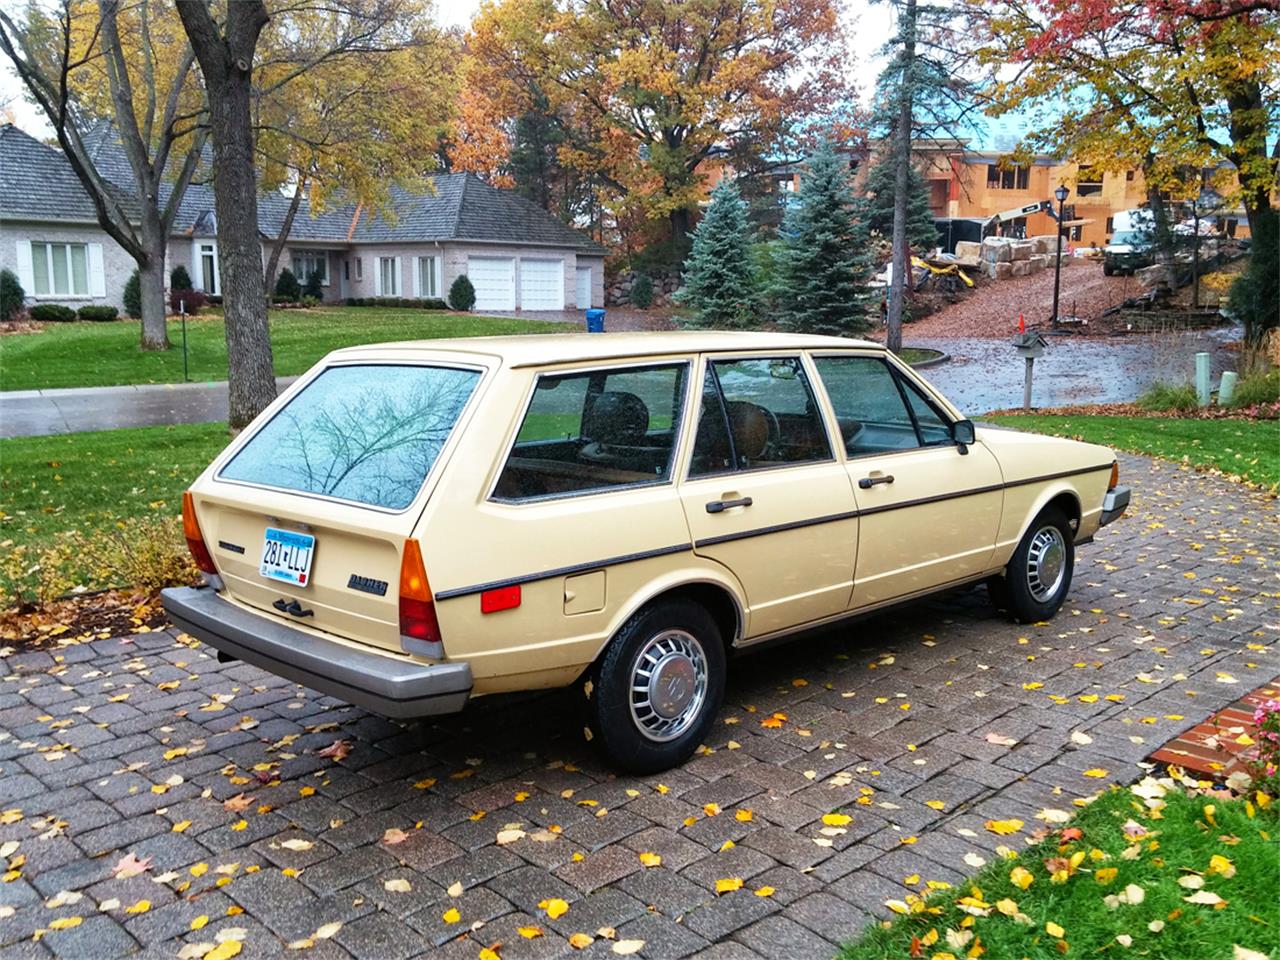 1978 Volkswagen Dasher for Sale | ClassicCars.com | CC-741160